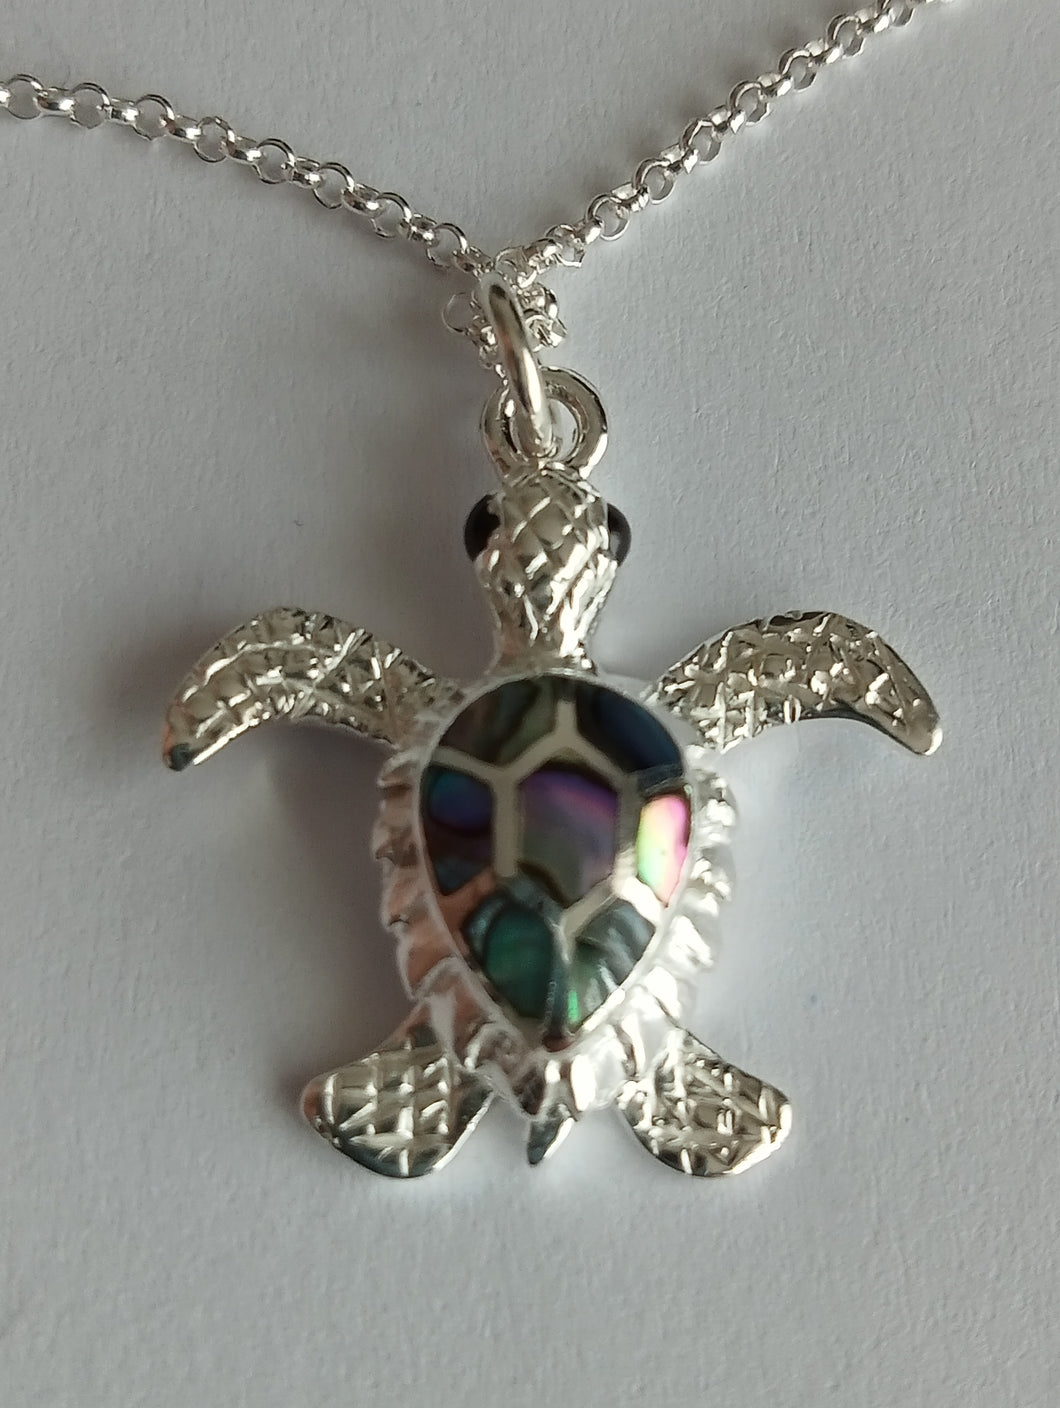 Small Turtle Pendant made with Abalone Shell and Silver